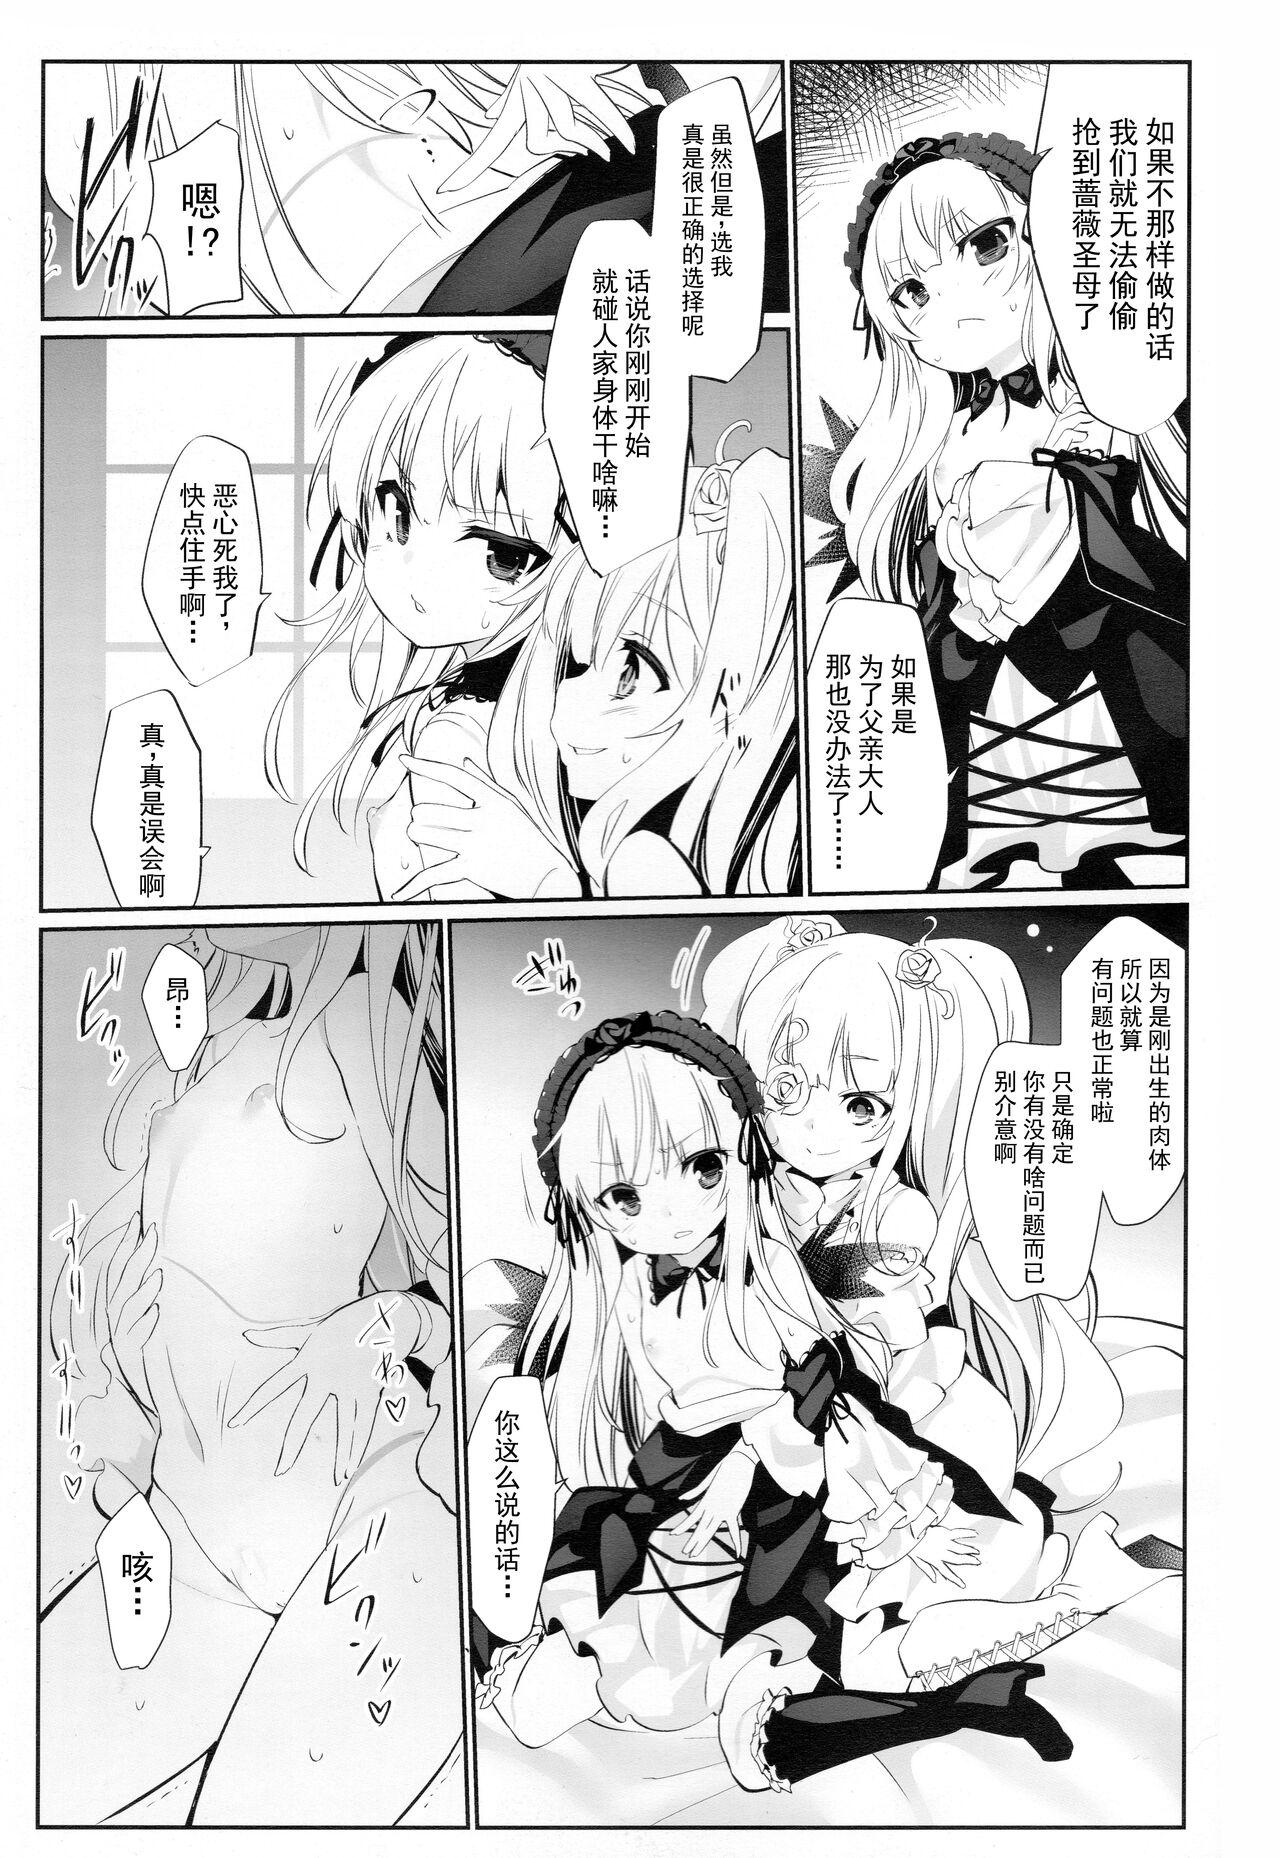 Gayemo Glamour Growth - Rozen maiden Shaven - Page 4